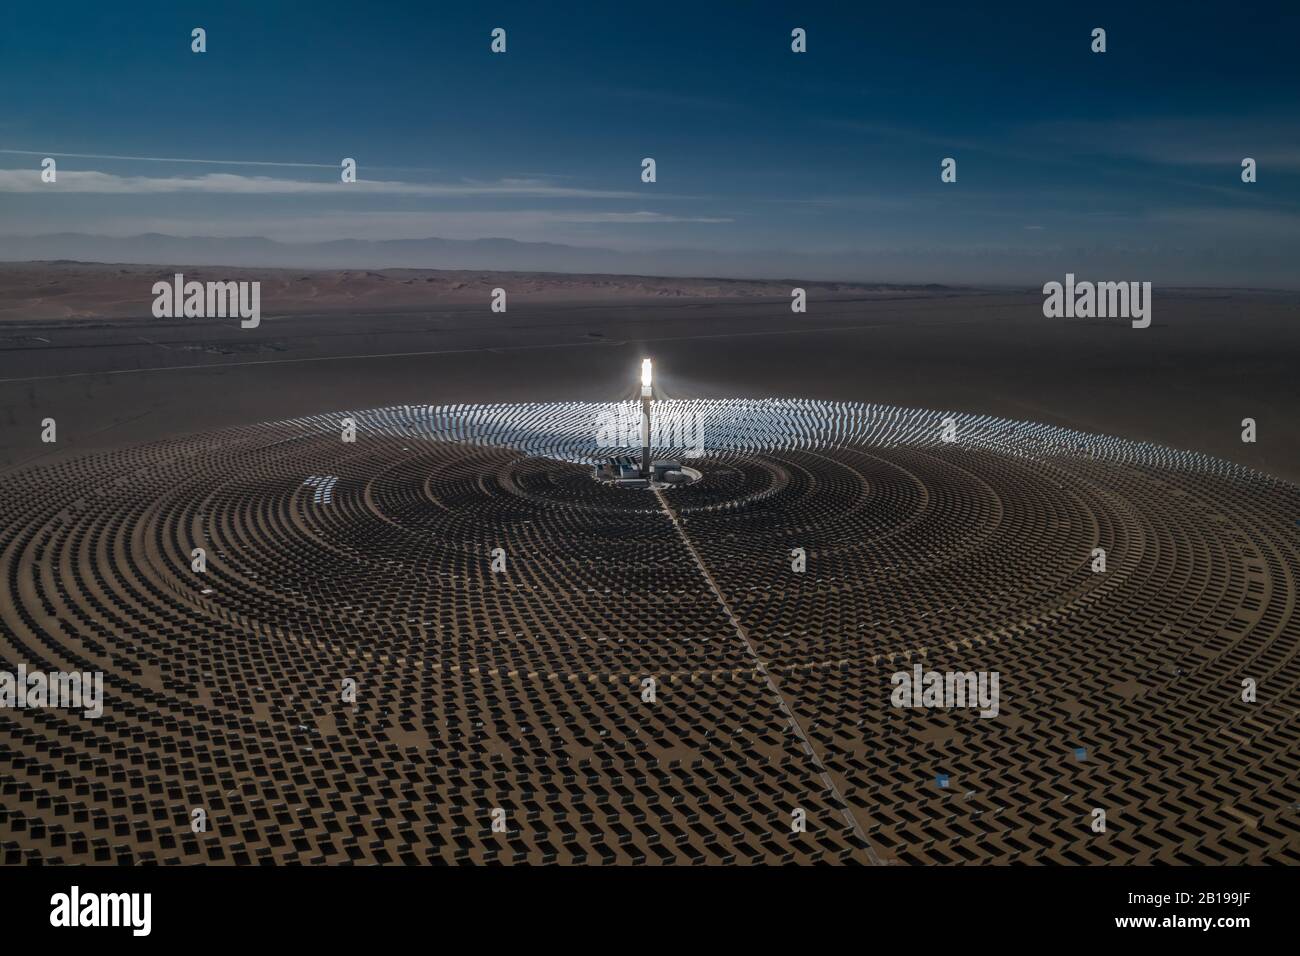 Aerial view of solar thermal plant uses mirrors that focus the sun's rays on a collection tower to produce renewable and pollution-free energy. Stock Photo